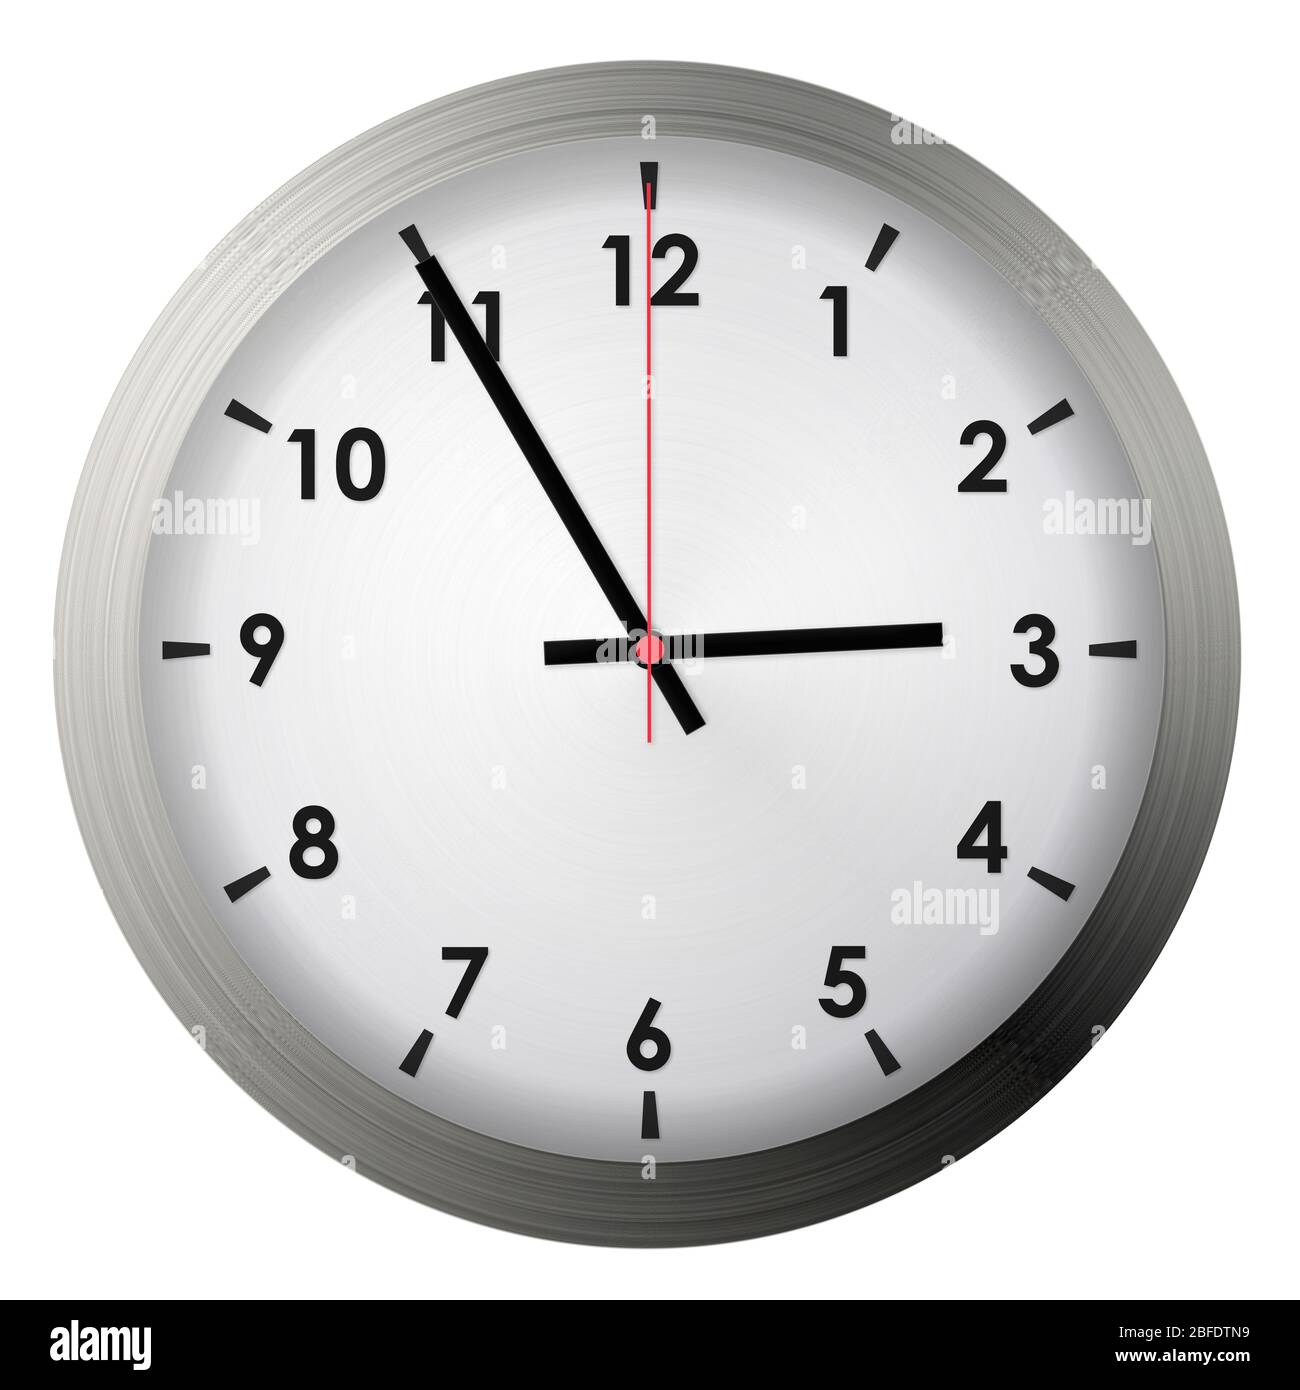 Analog metal wall clock isolated on white background. Stock Photo